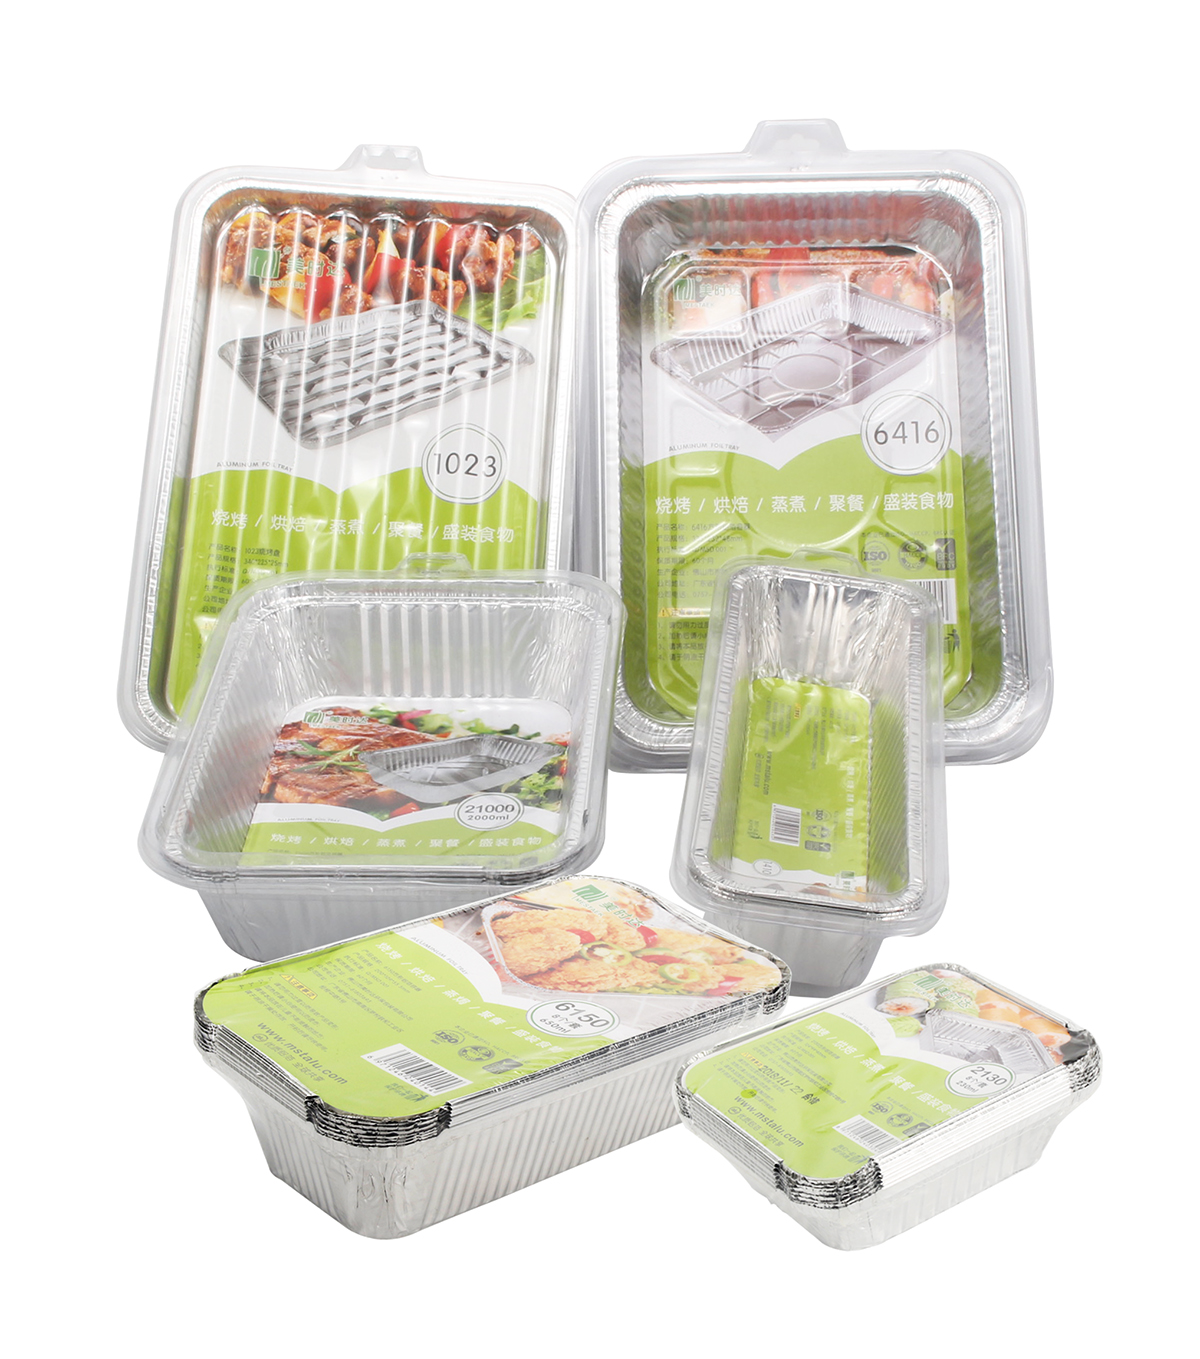 take-out food containers.jpg